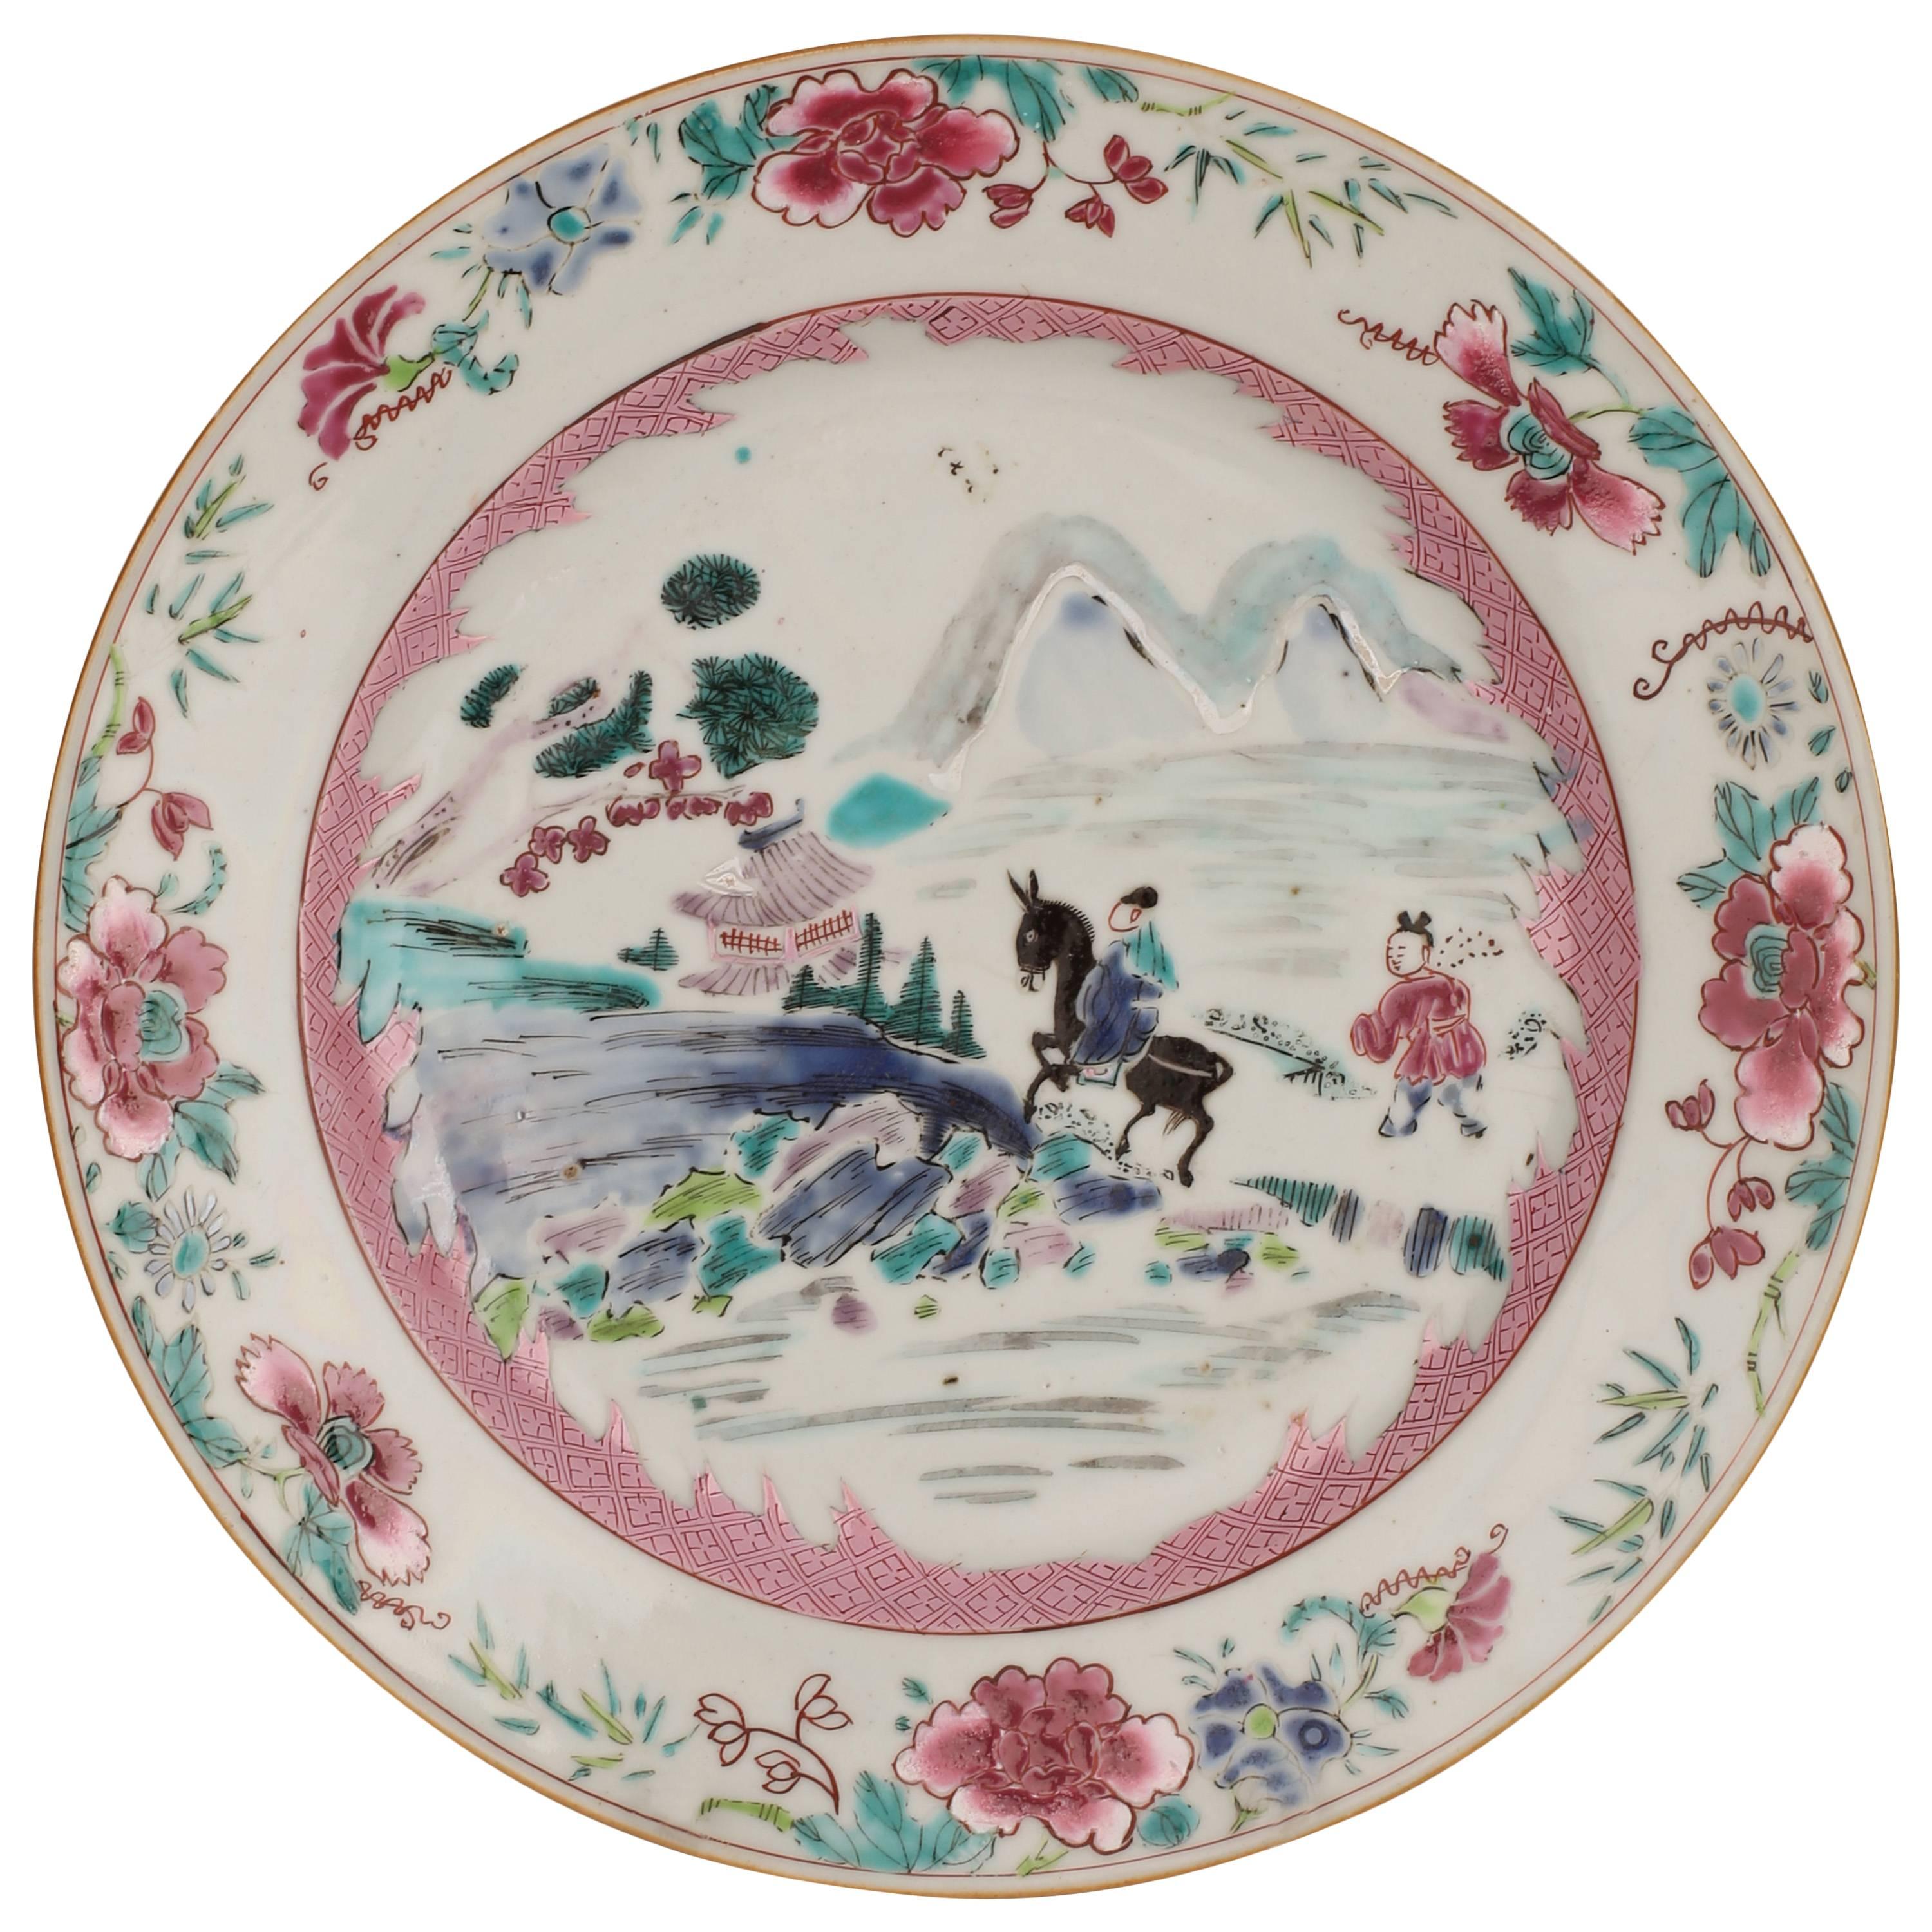 Chinese Porcelain Famille Rose Plate Painted with a Man on a Donkey 18th Century For Sale